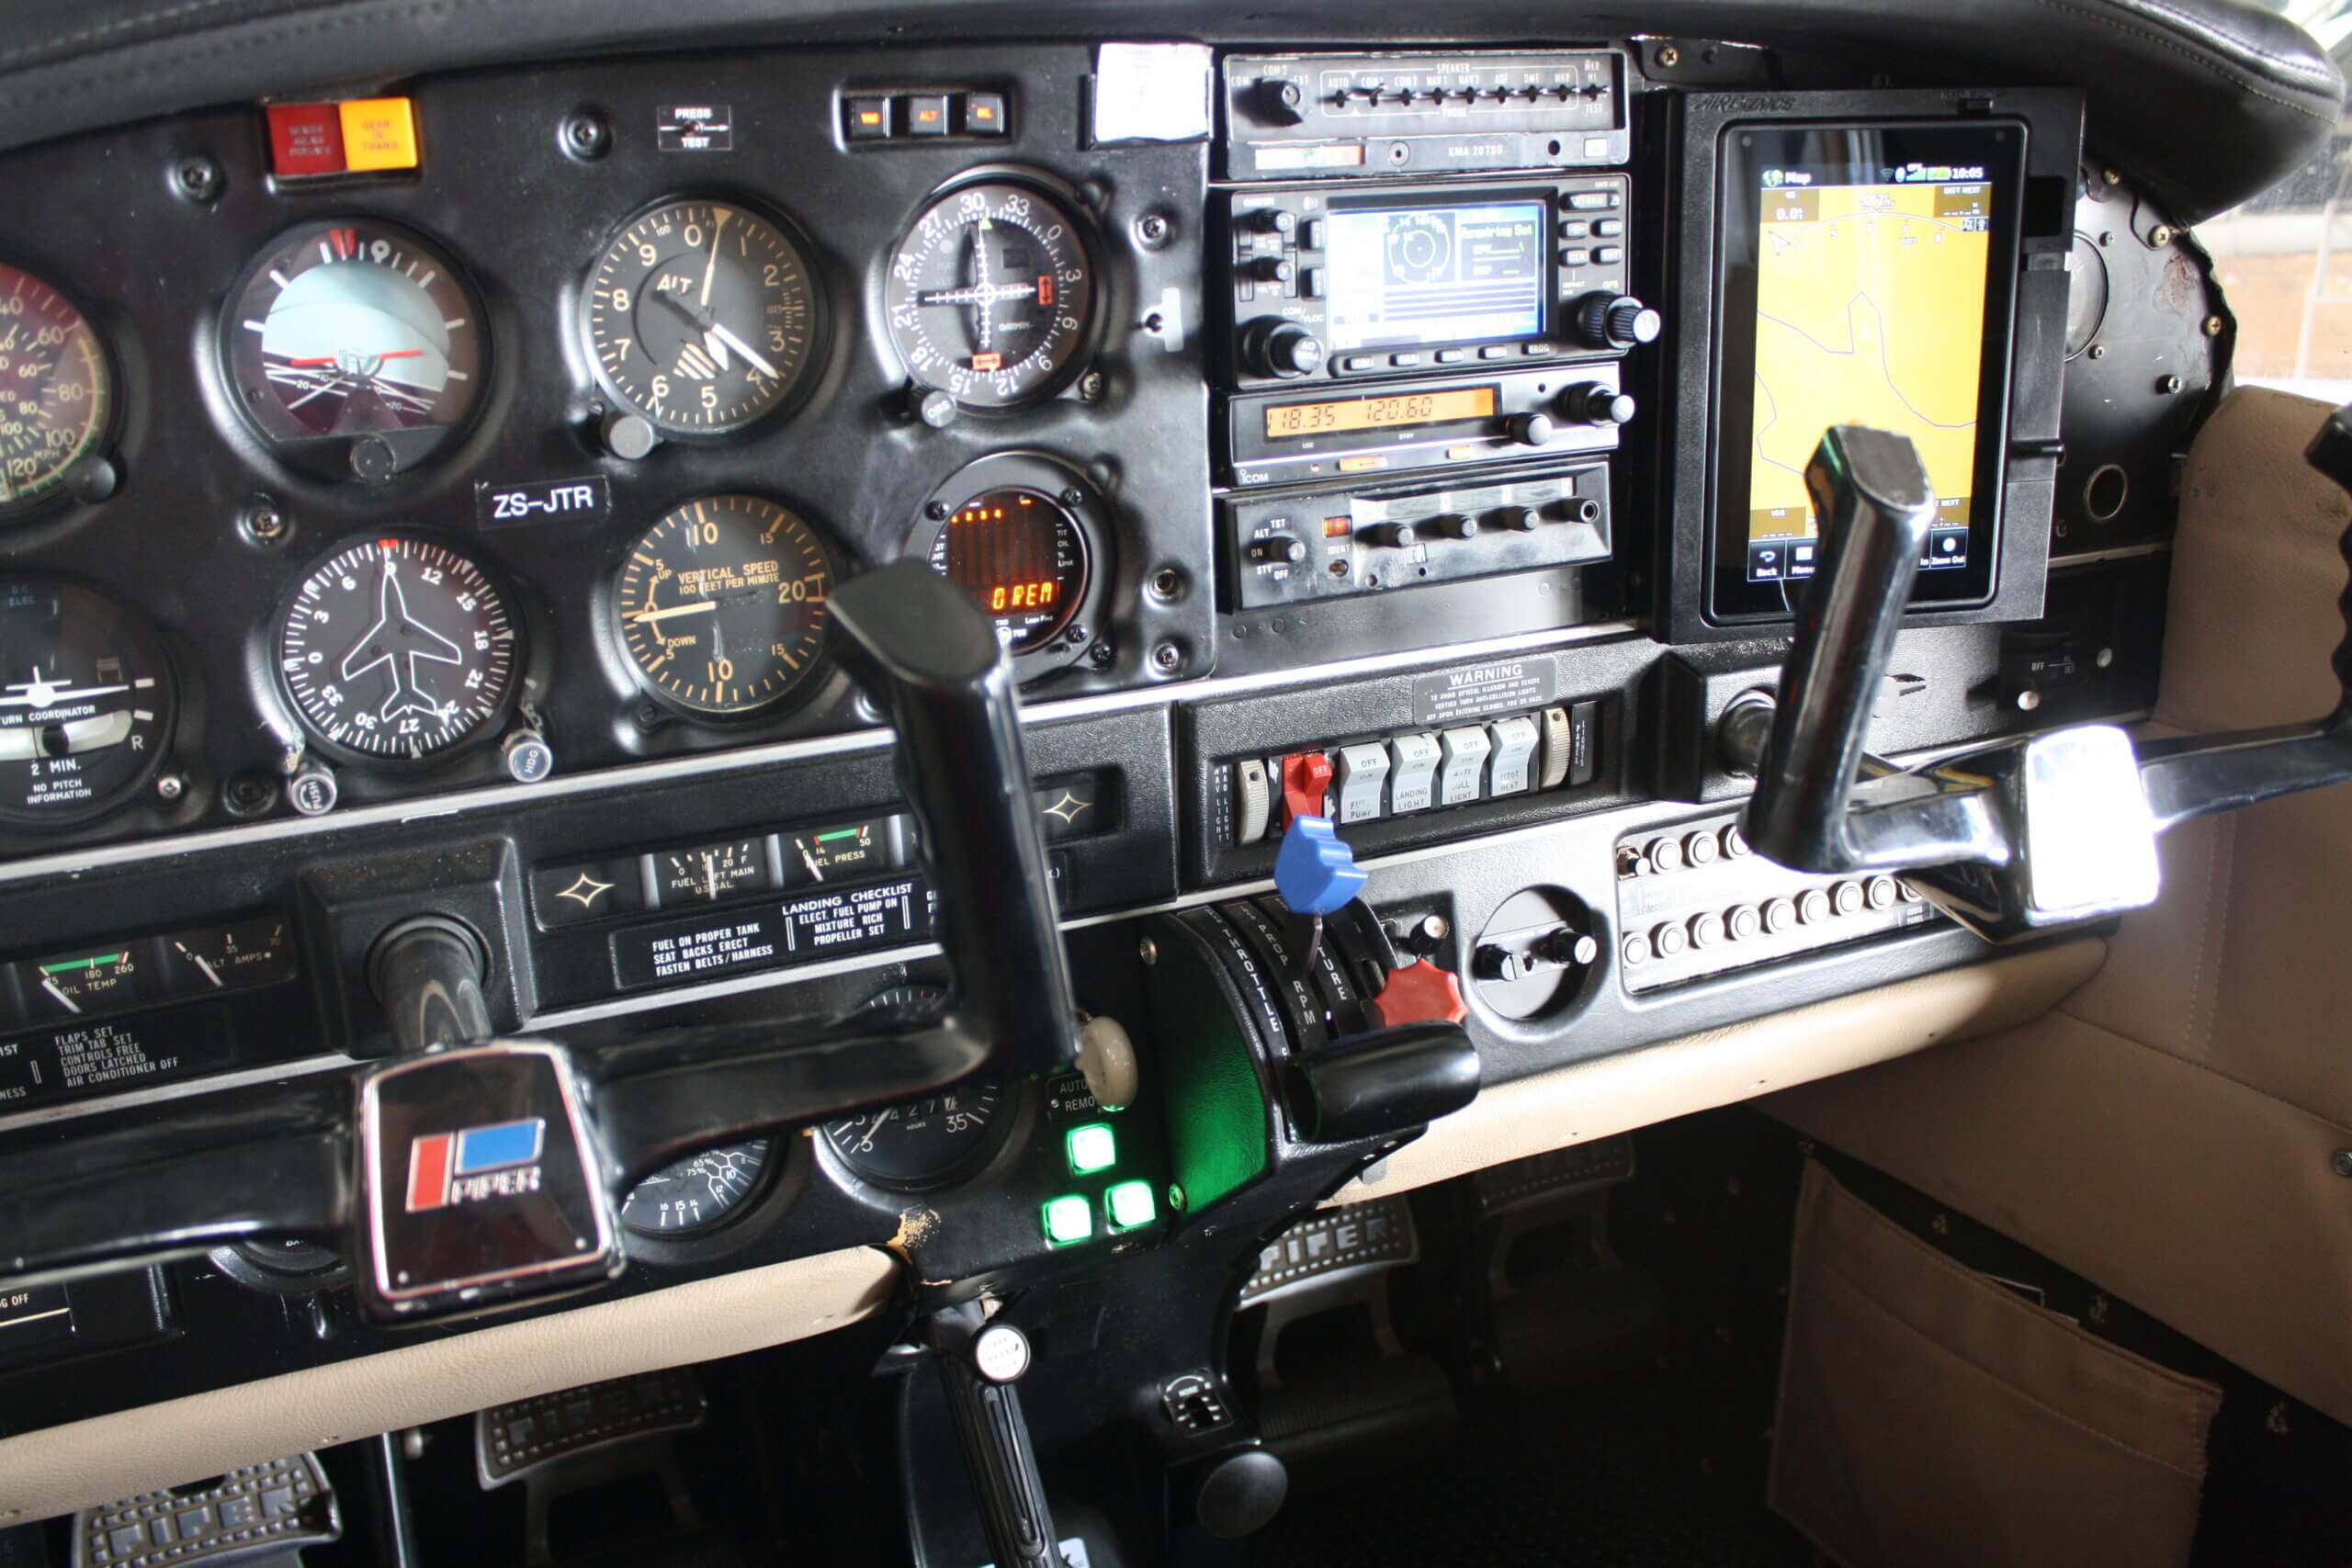 Install Garmin Aera760 GPS and cleanup stack on Piper Arrow.